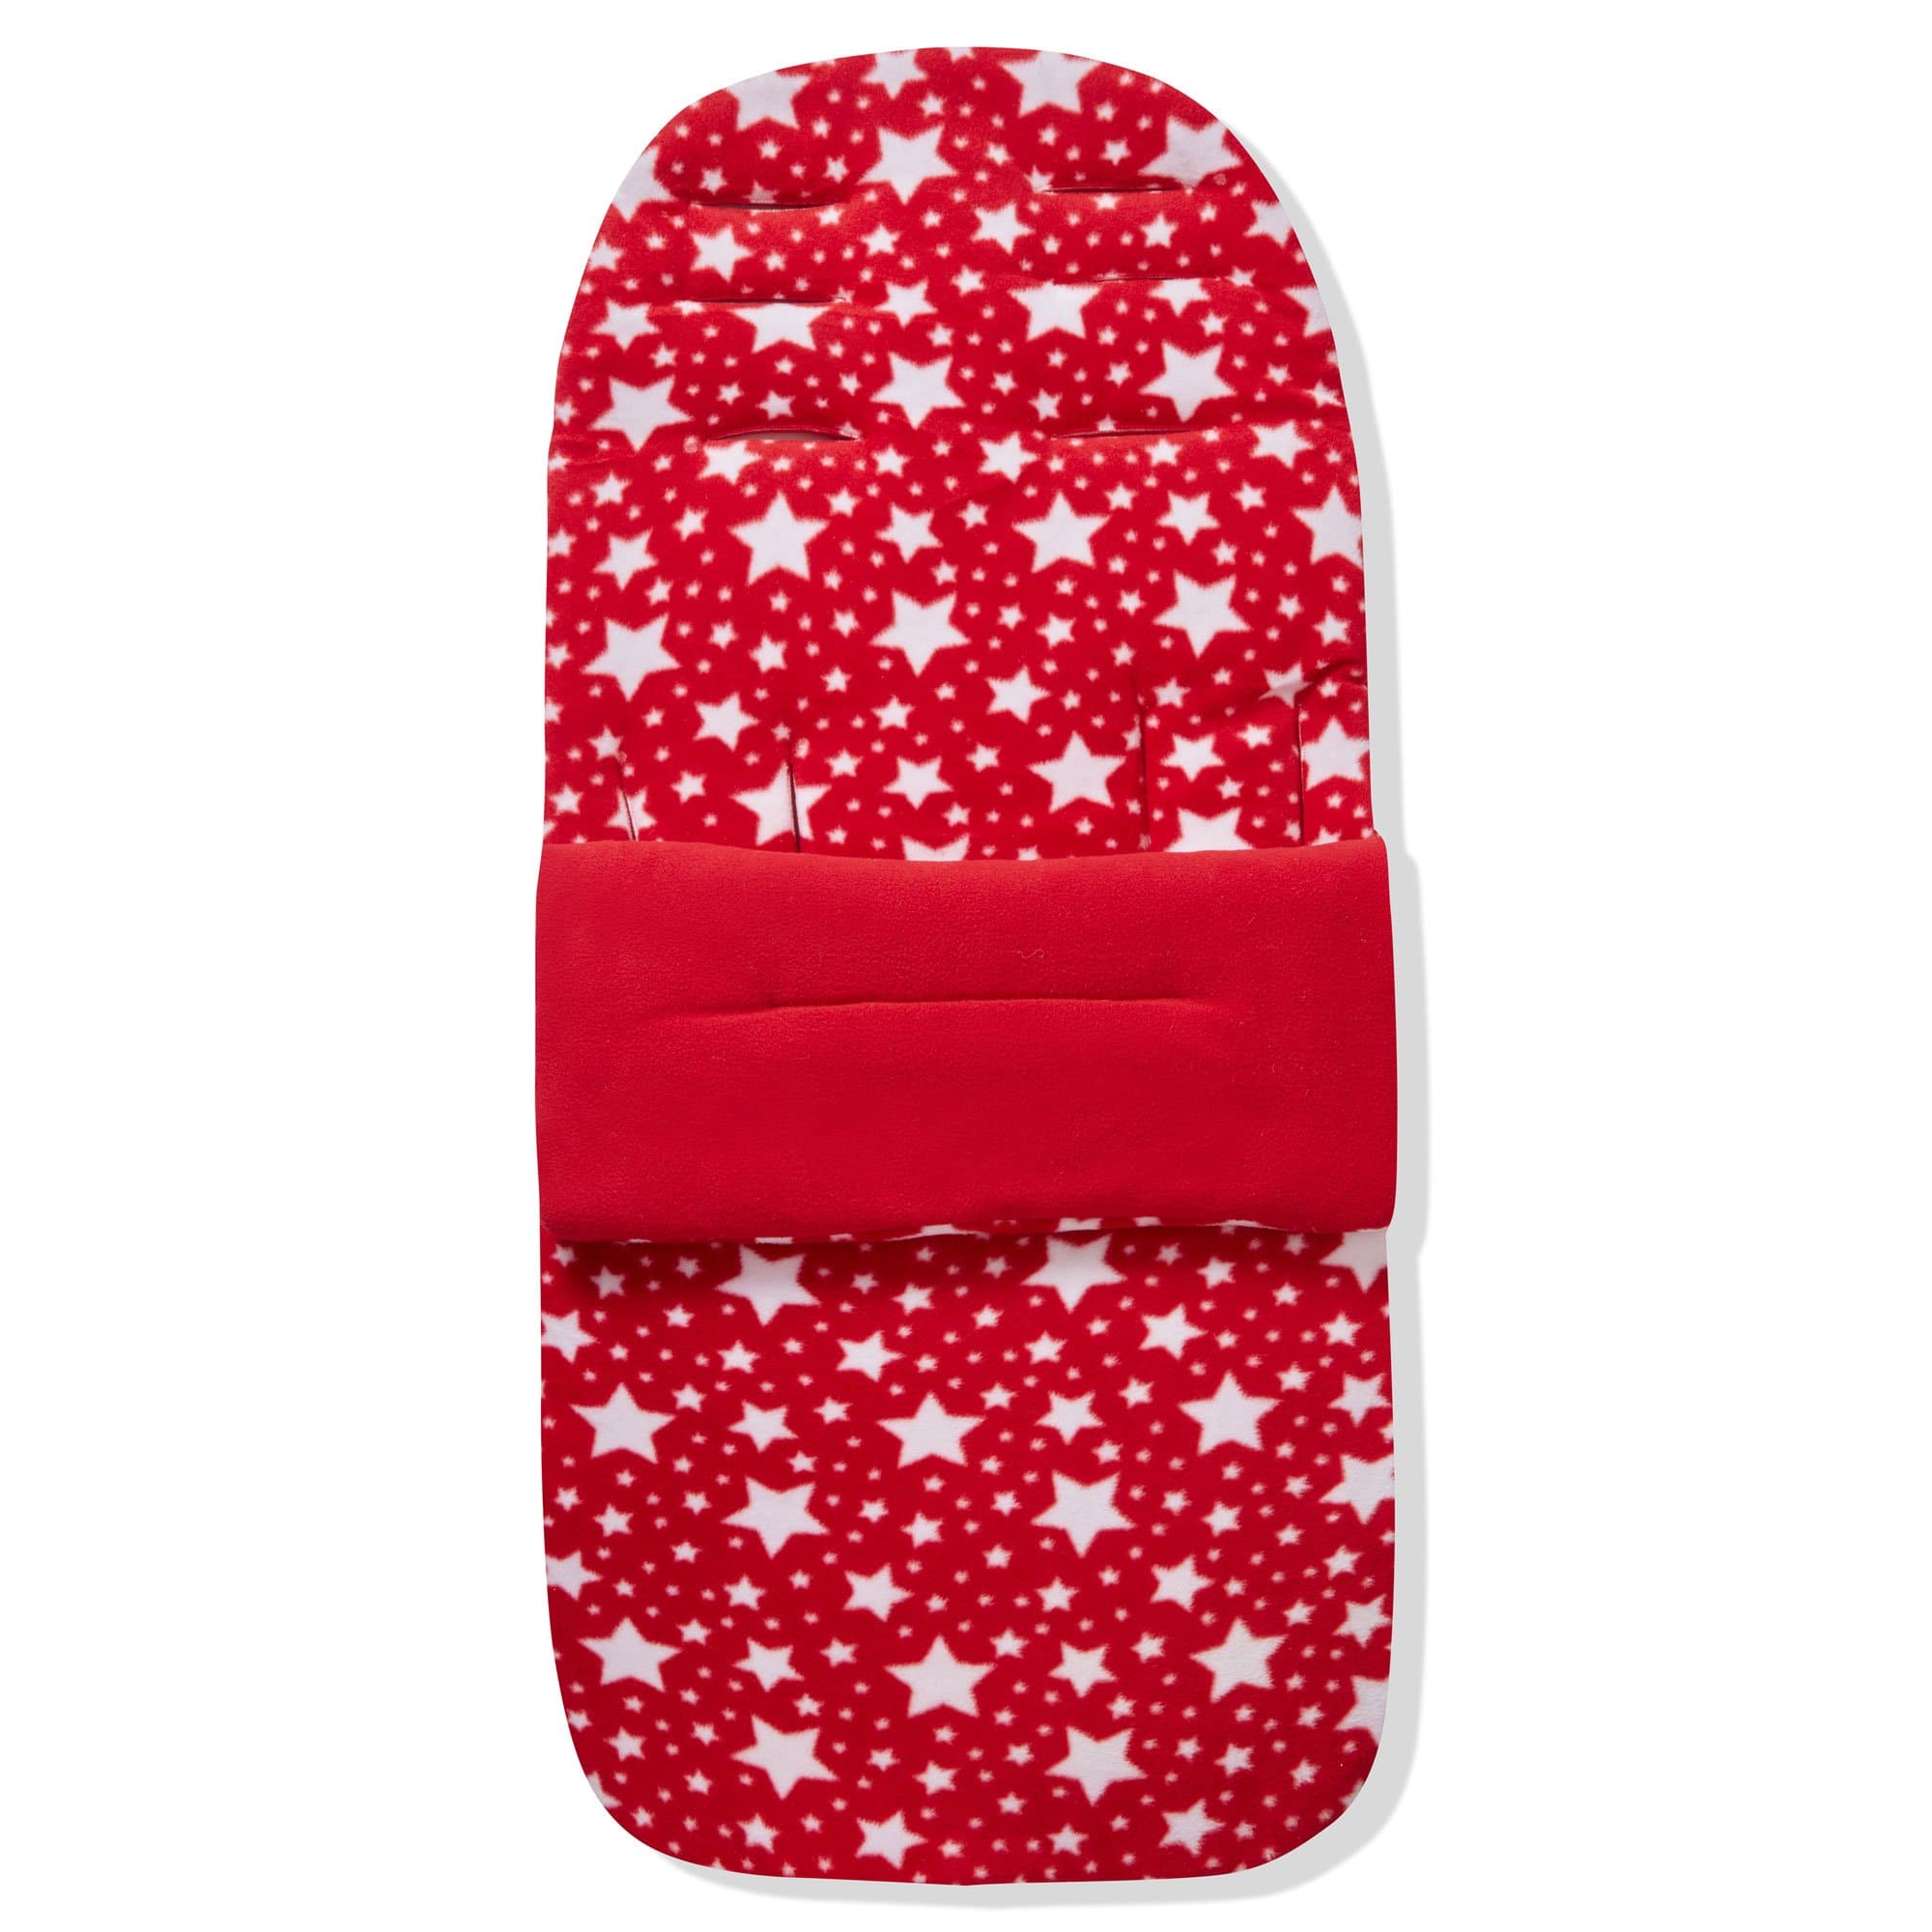 Fleece Footmuff / Cosy Toes Compatible with Teutonia - Red Star / Fits All Models | For Your Little One